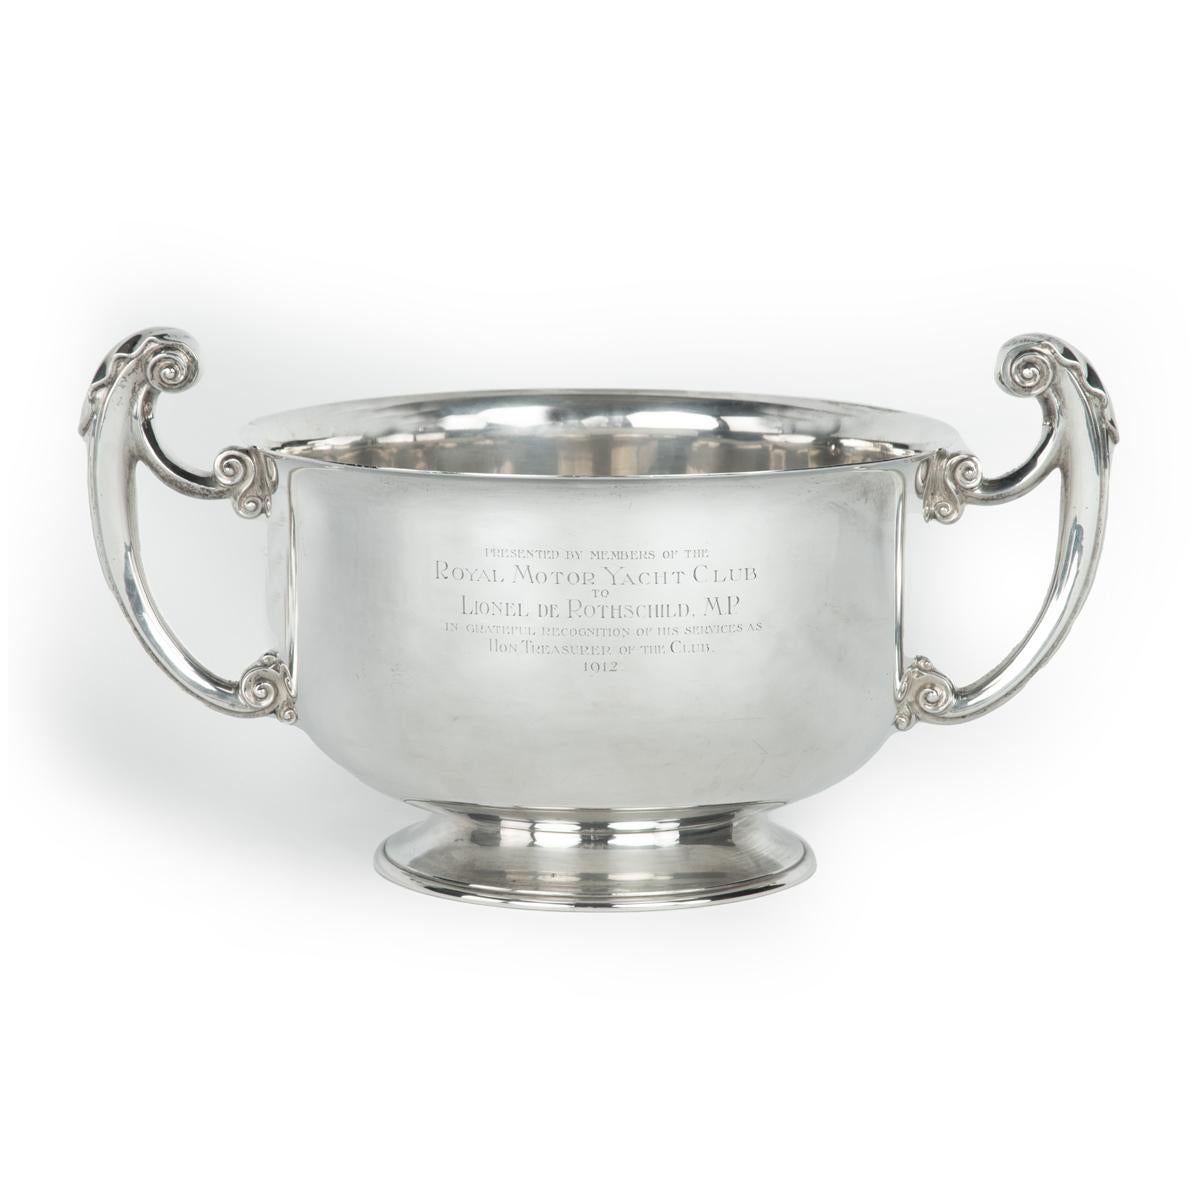 The ‘Entente Cordial’ silver champagne cooler for the British Motor Boat Club, 1905. This deep cylindrical bowl by Charles Townley and John Thomas is of heavy gauge with a raised circular foot, two acanthus scroll handles and cut-card acanthus